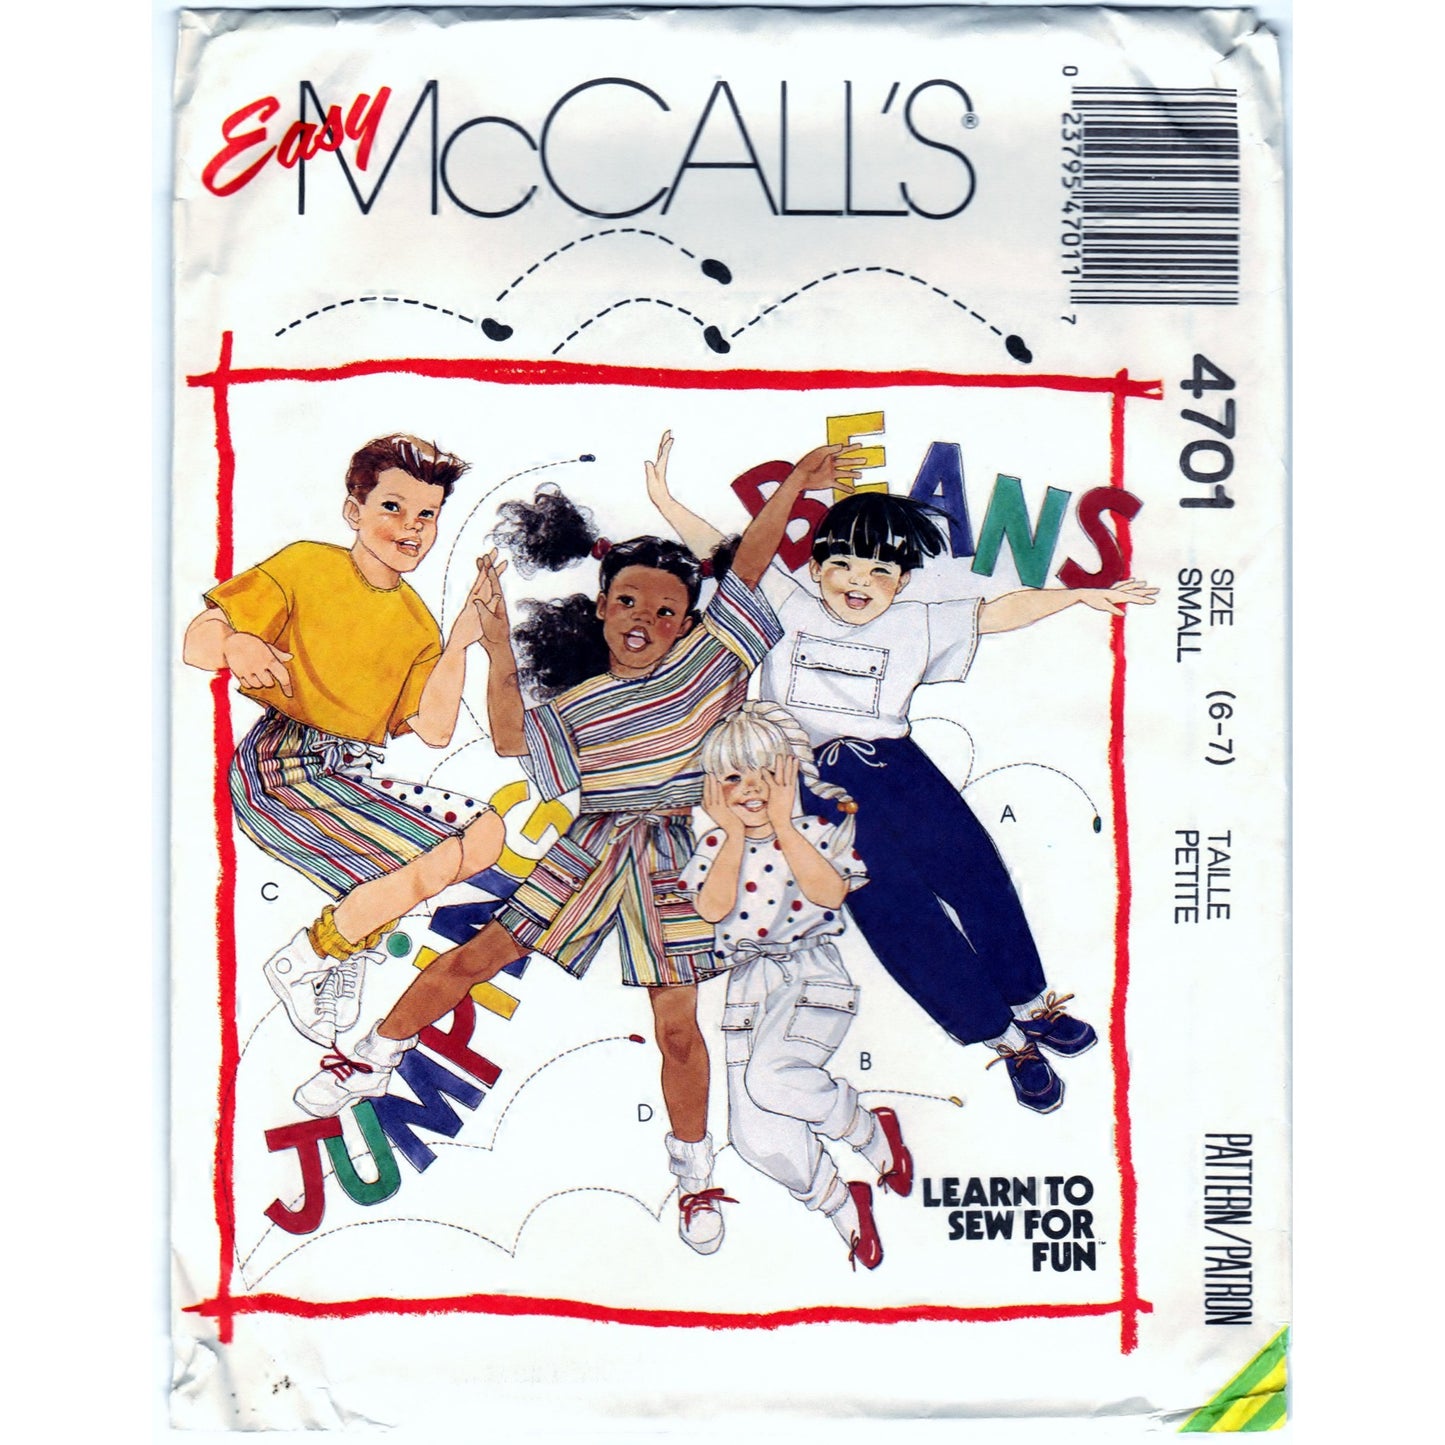 McCalls 4701 Pattern Vintage Boy and Girl Tops, Pants, and Shorts